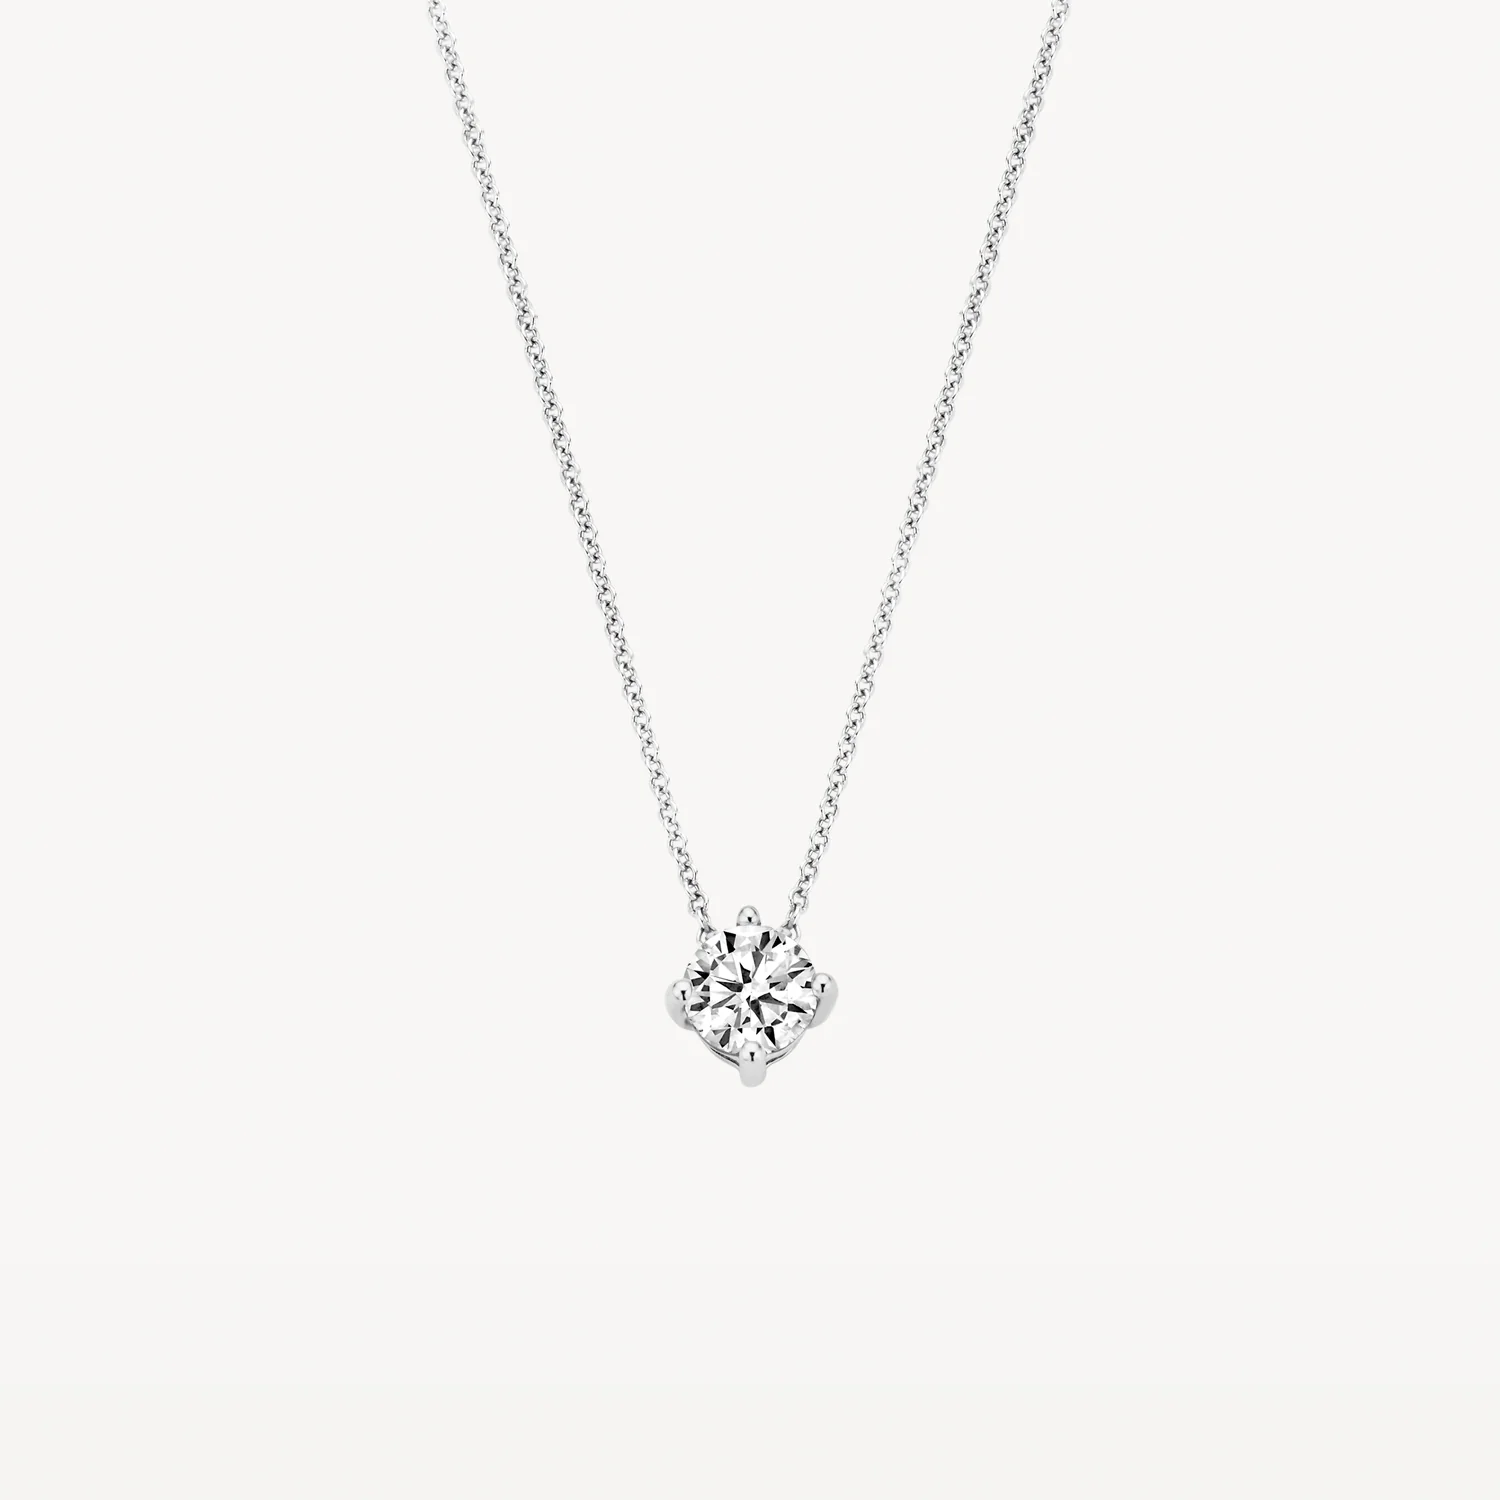 Blush White Gold Necklace with CZ Pendant